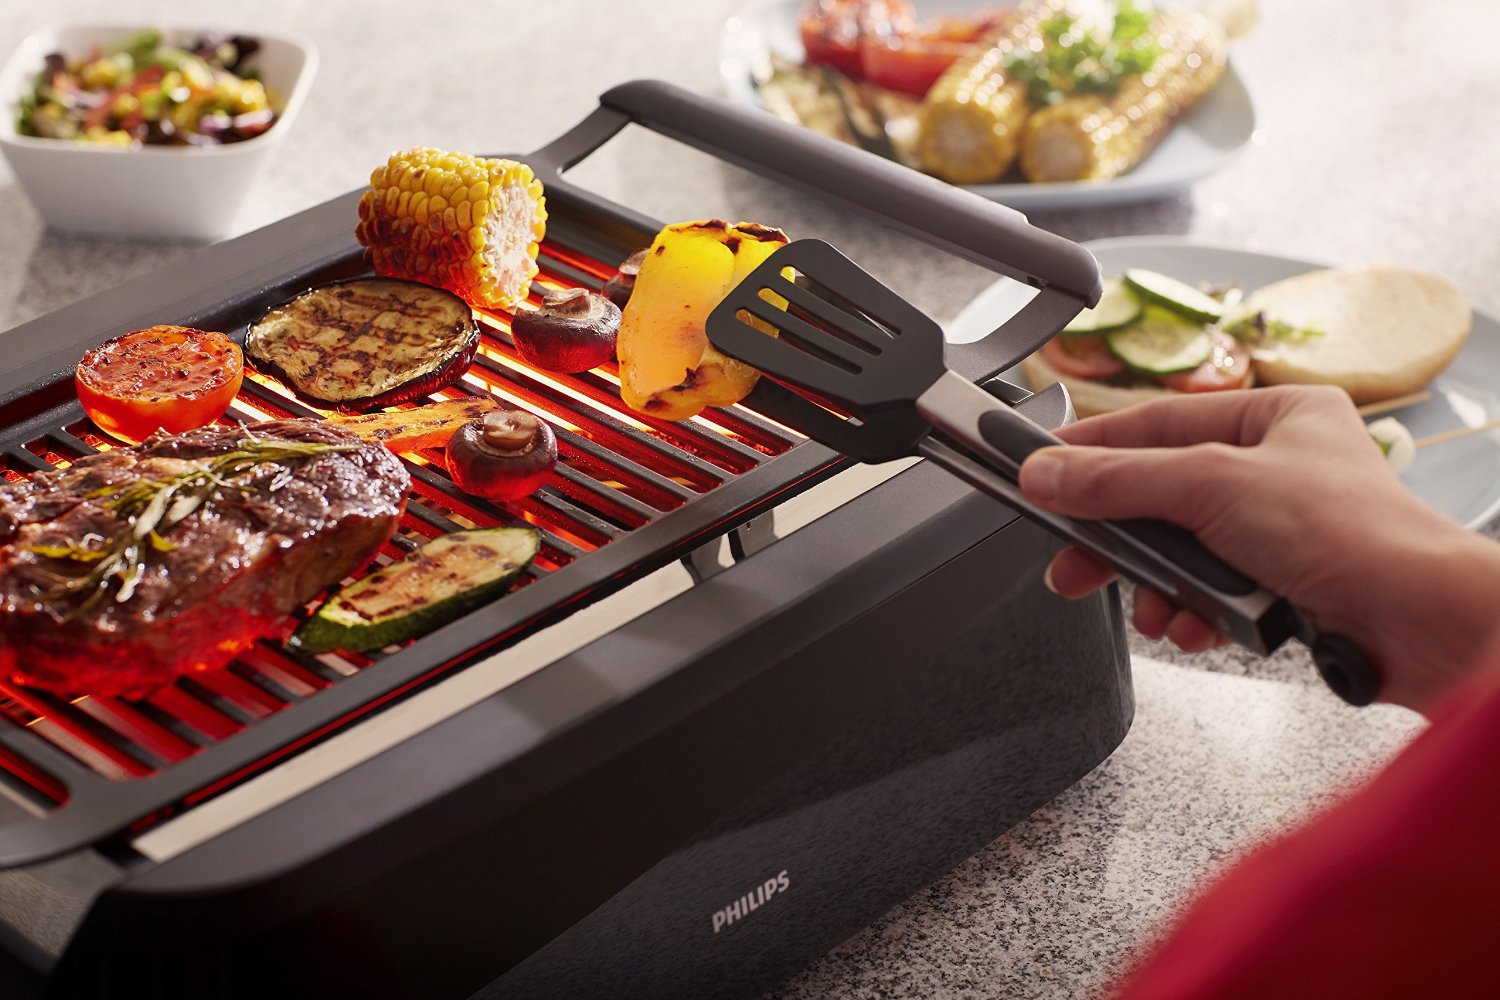 What are Philips Smokeless Indoor Grill Reviews and Benefits